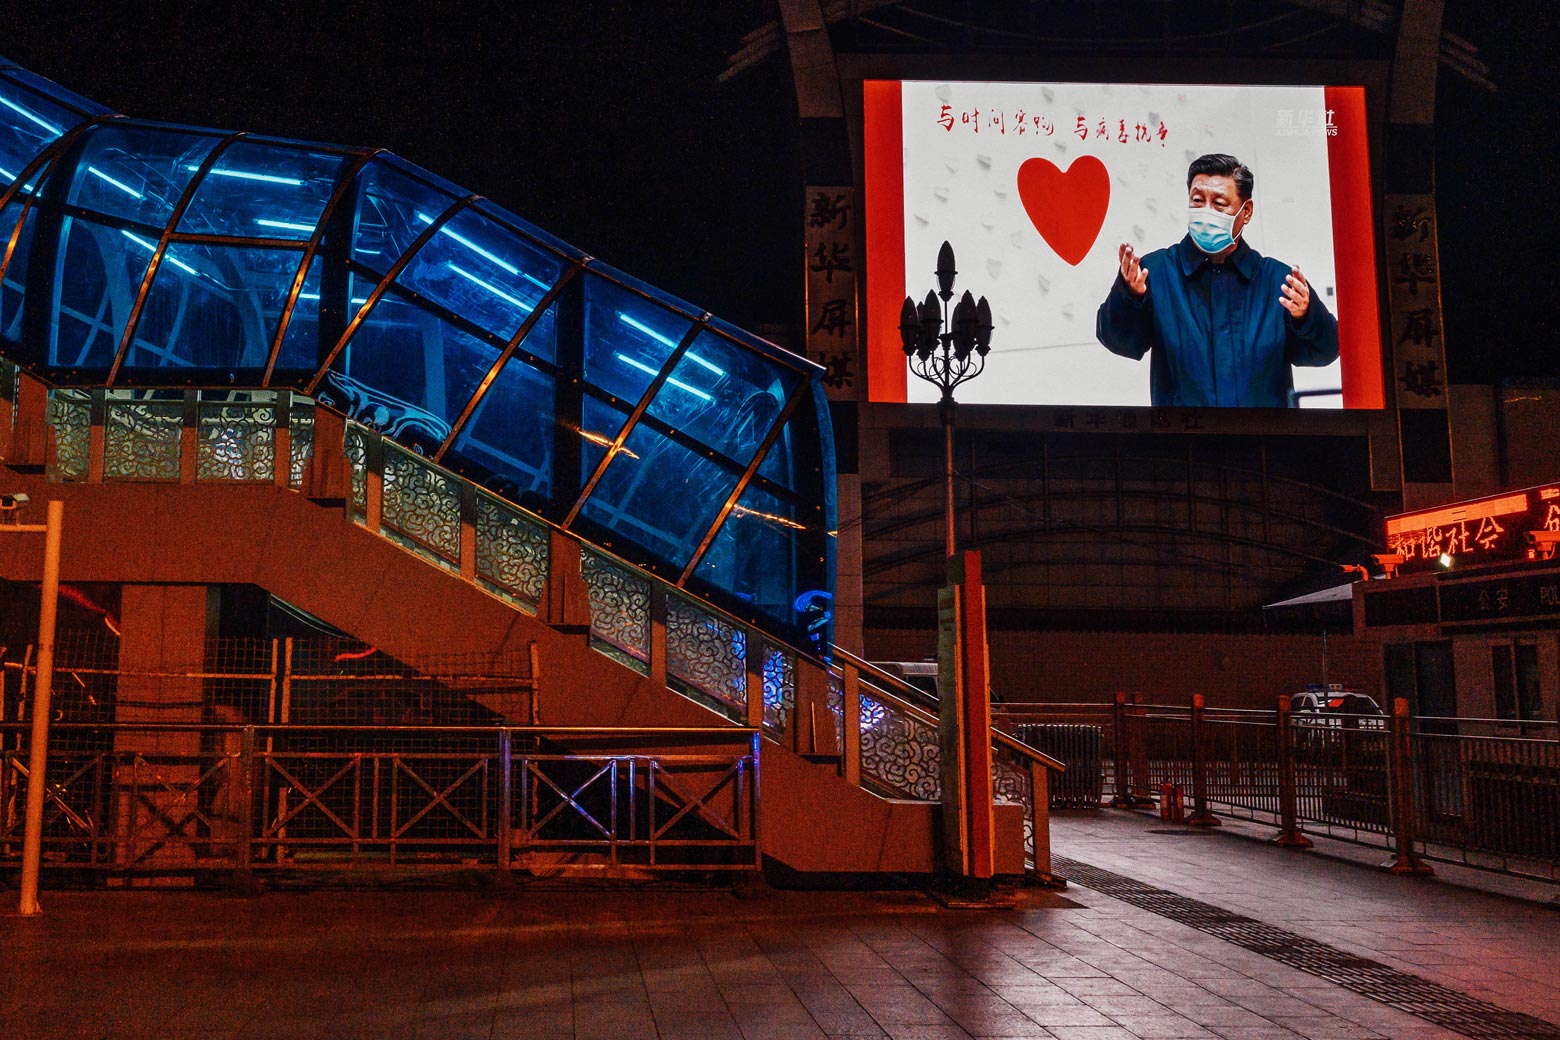 Outside a nearly empty railway station, a large monitor shows an image of Chinese President Xi Jinping wearing a mask next to a heart.